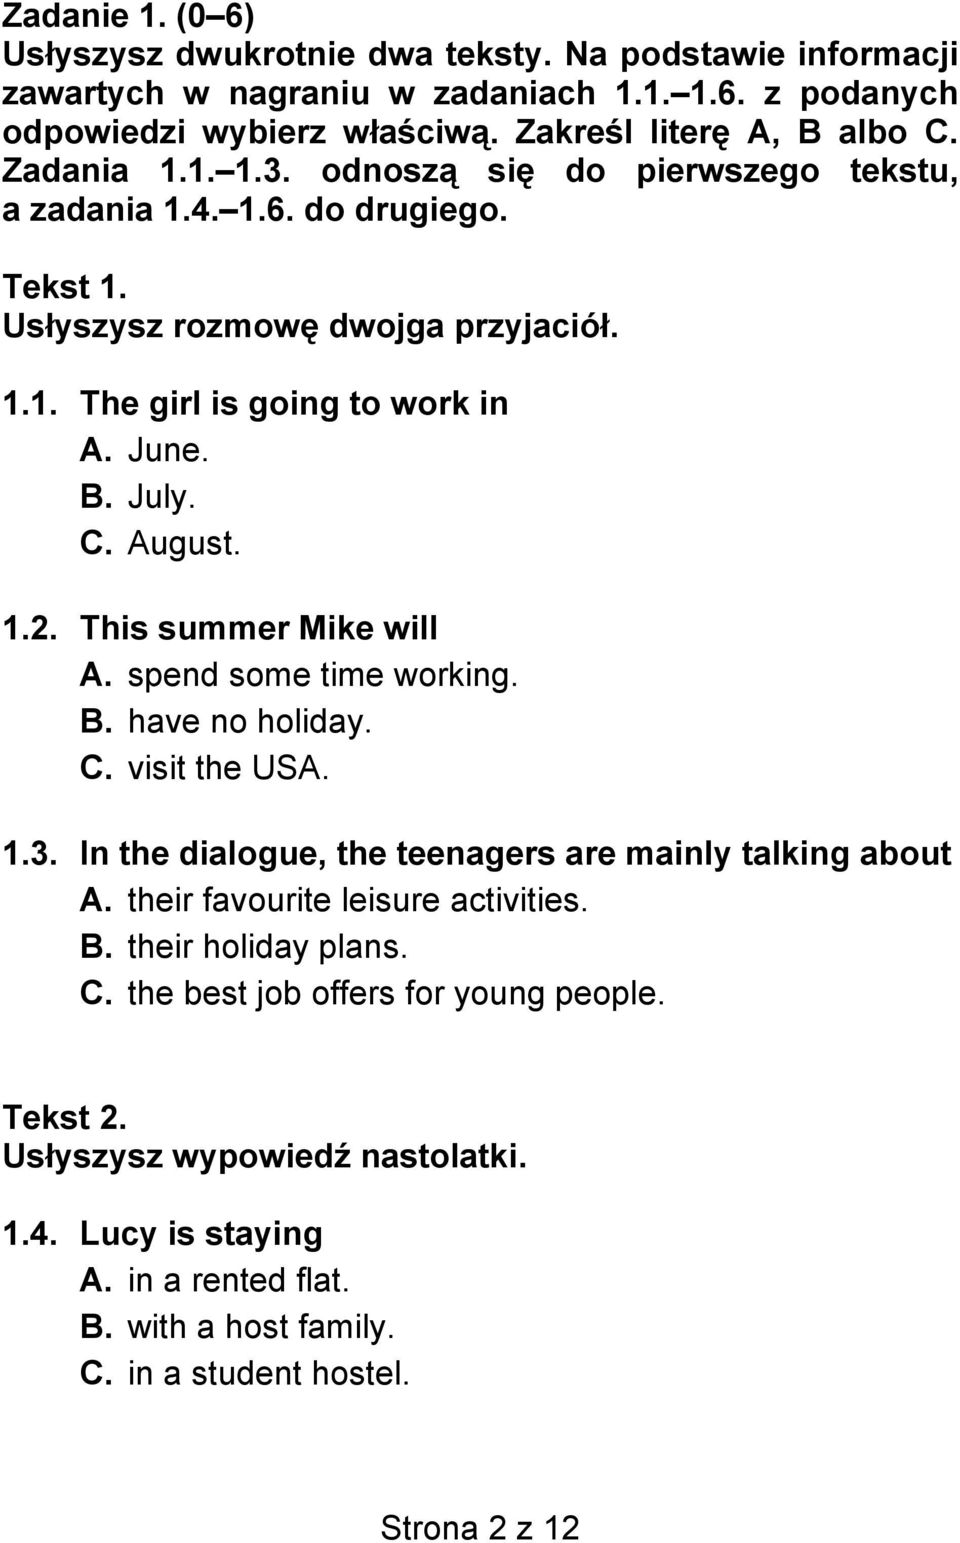 This summer Mike will А. spend some time working. В. have no holiday. С. visit the USA. 1.3. In the dialogue, the teenagers are mainly talking about А. their favourite leisure activities. В. their holiday plans.